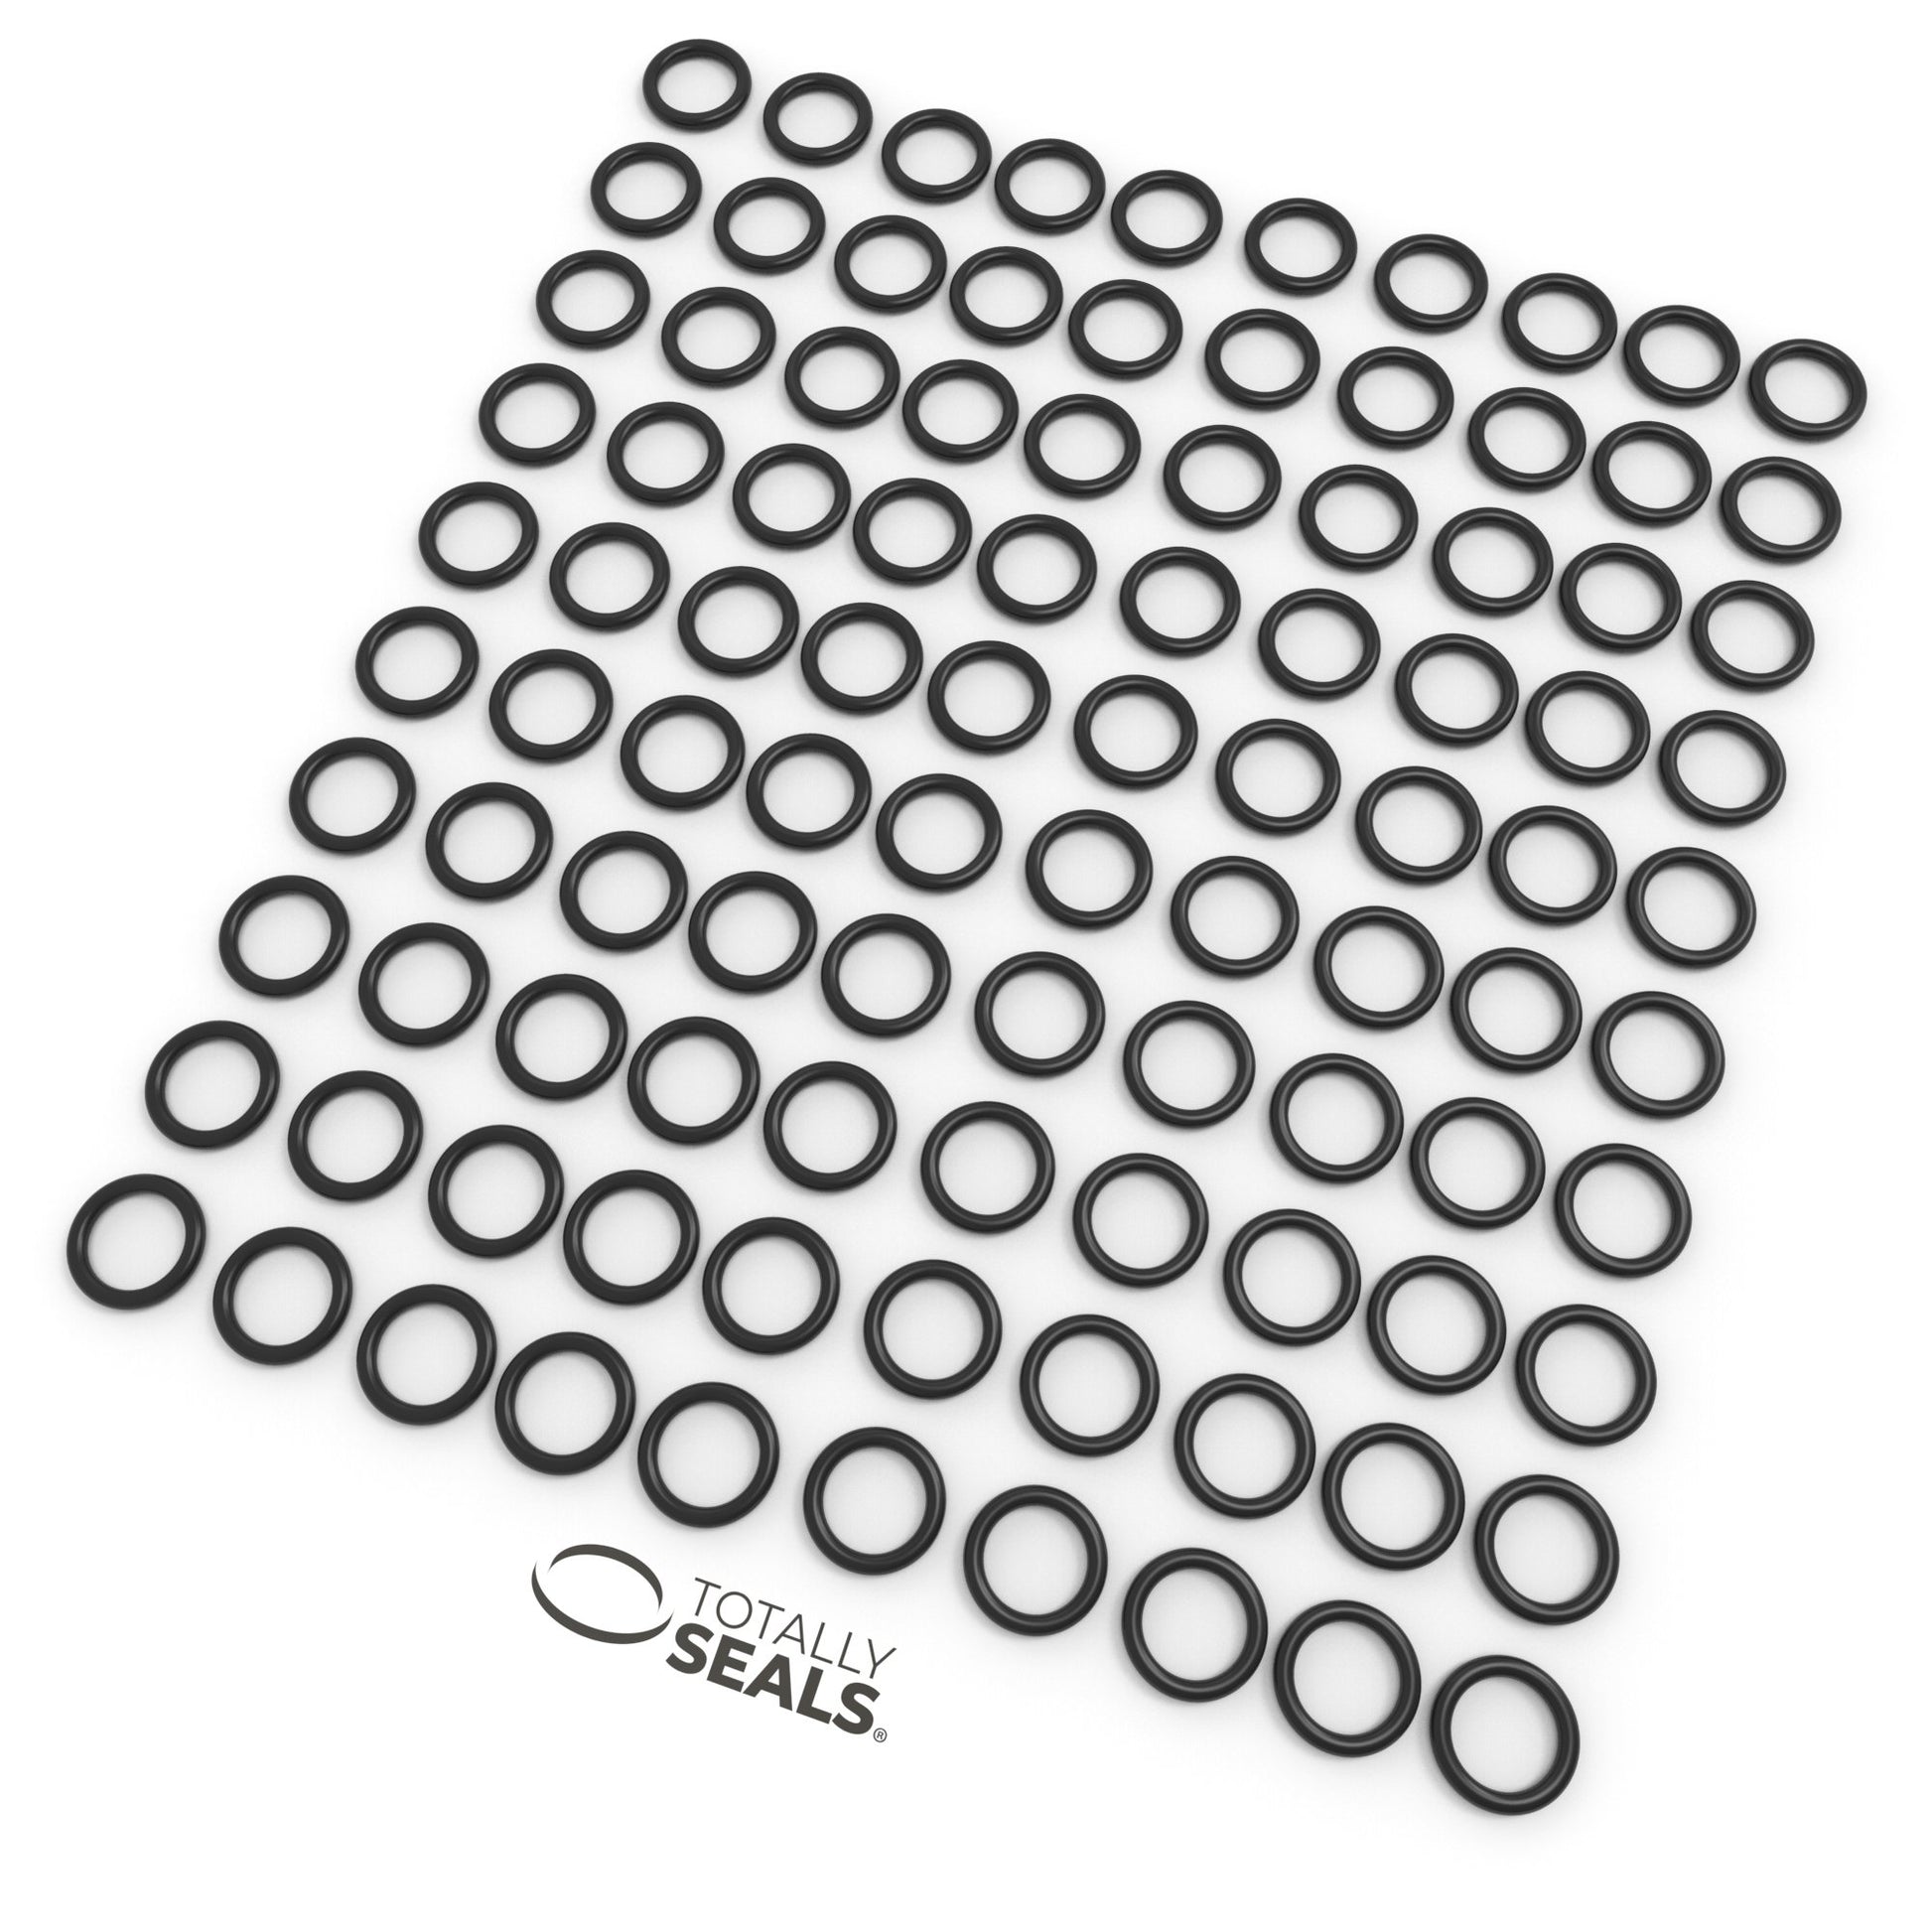 15mm x 3mm (21mm OD) Nitrile O-Rings - Totally Seals®